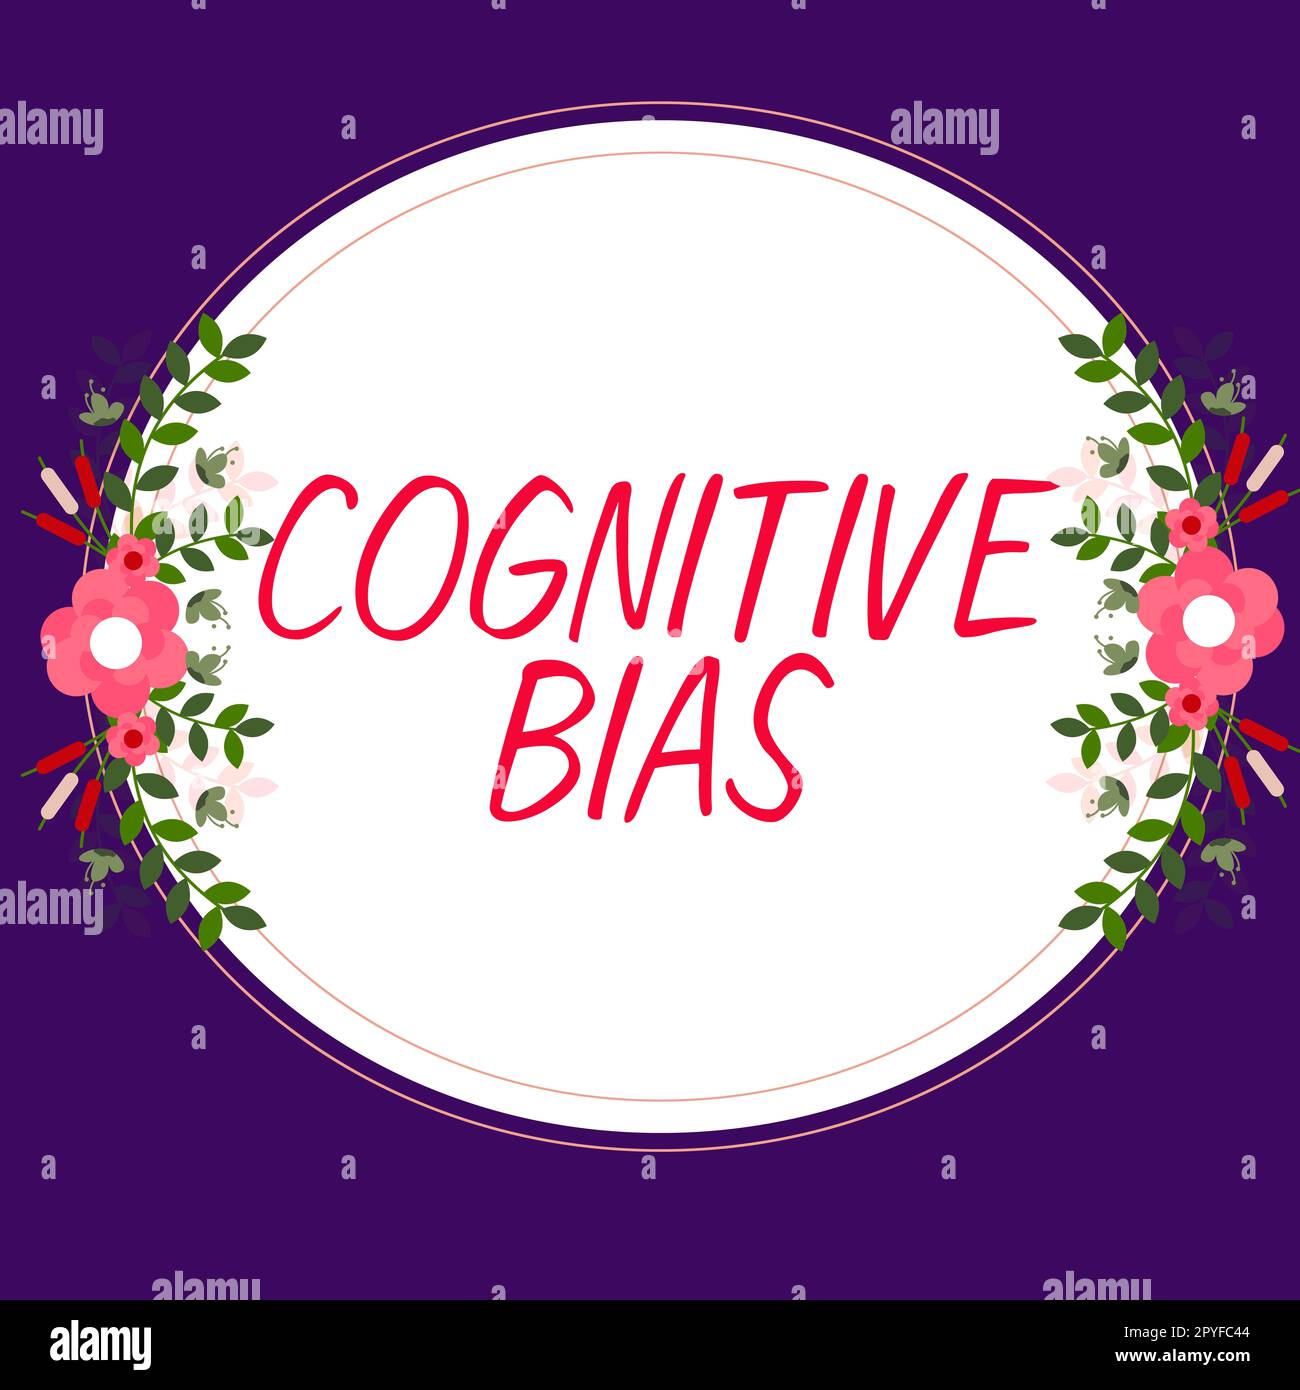 Hand writing sign Cognitive Bias. Word for Psychological treatment for mental disorders Stock Photo